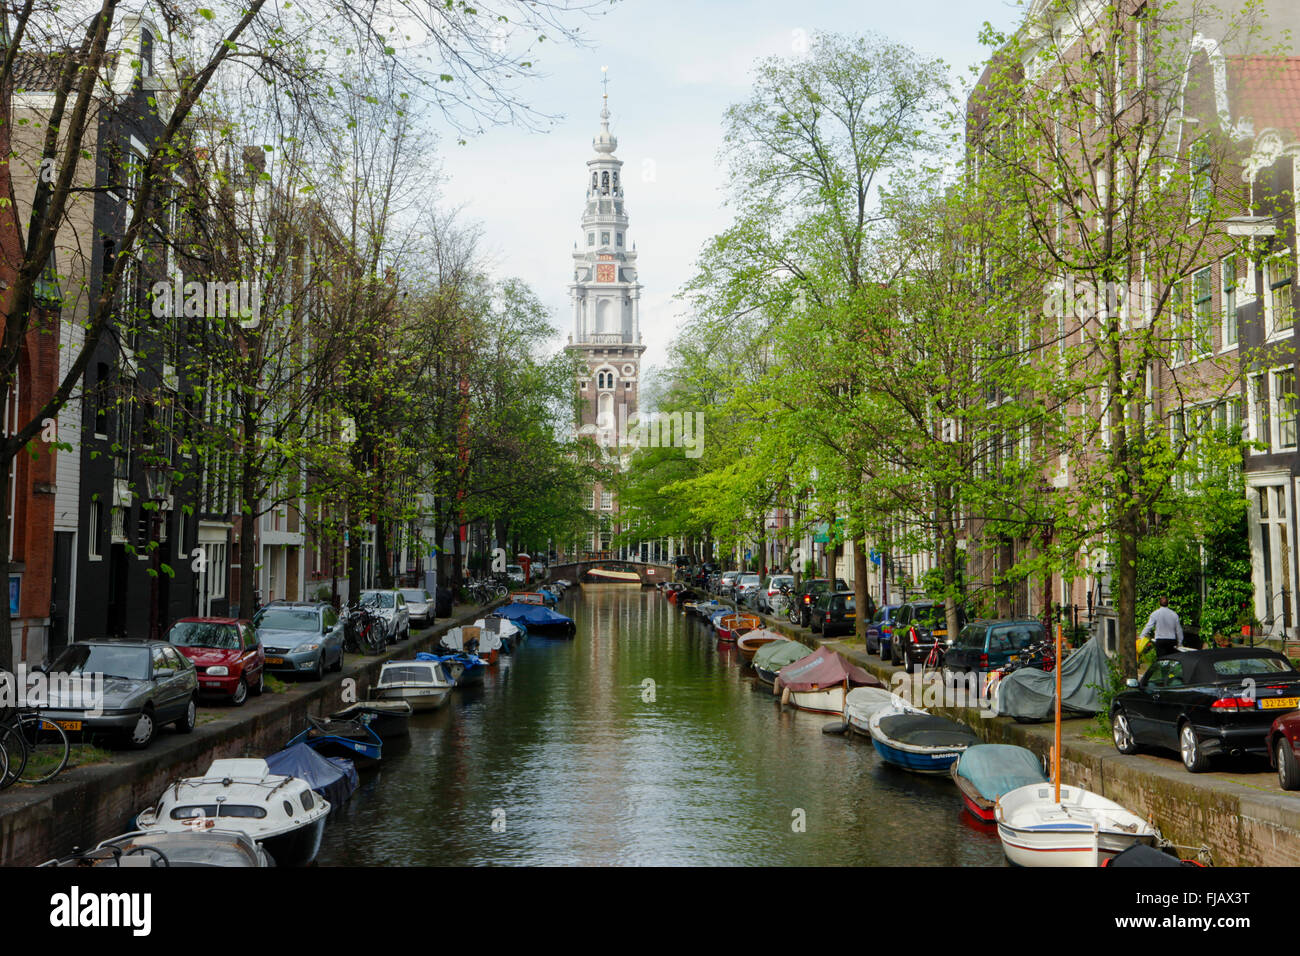 Zuiderkerk (South Church) tower and Groenburgwal canal on a Spring day, central Amsterdam, Netherlands Stock Photo